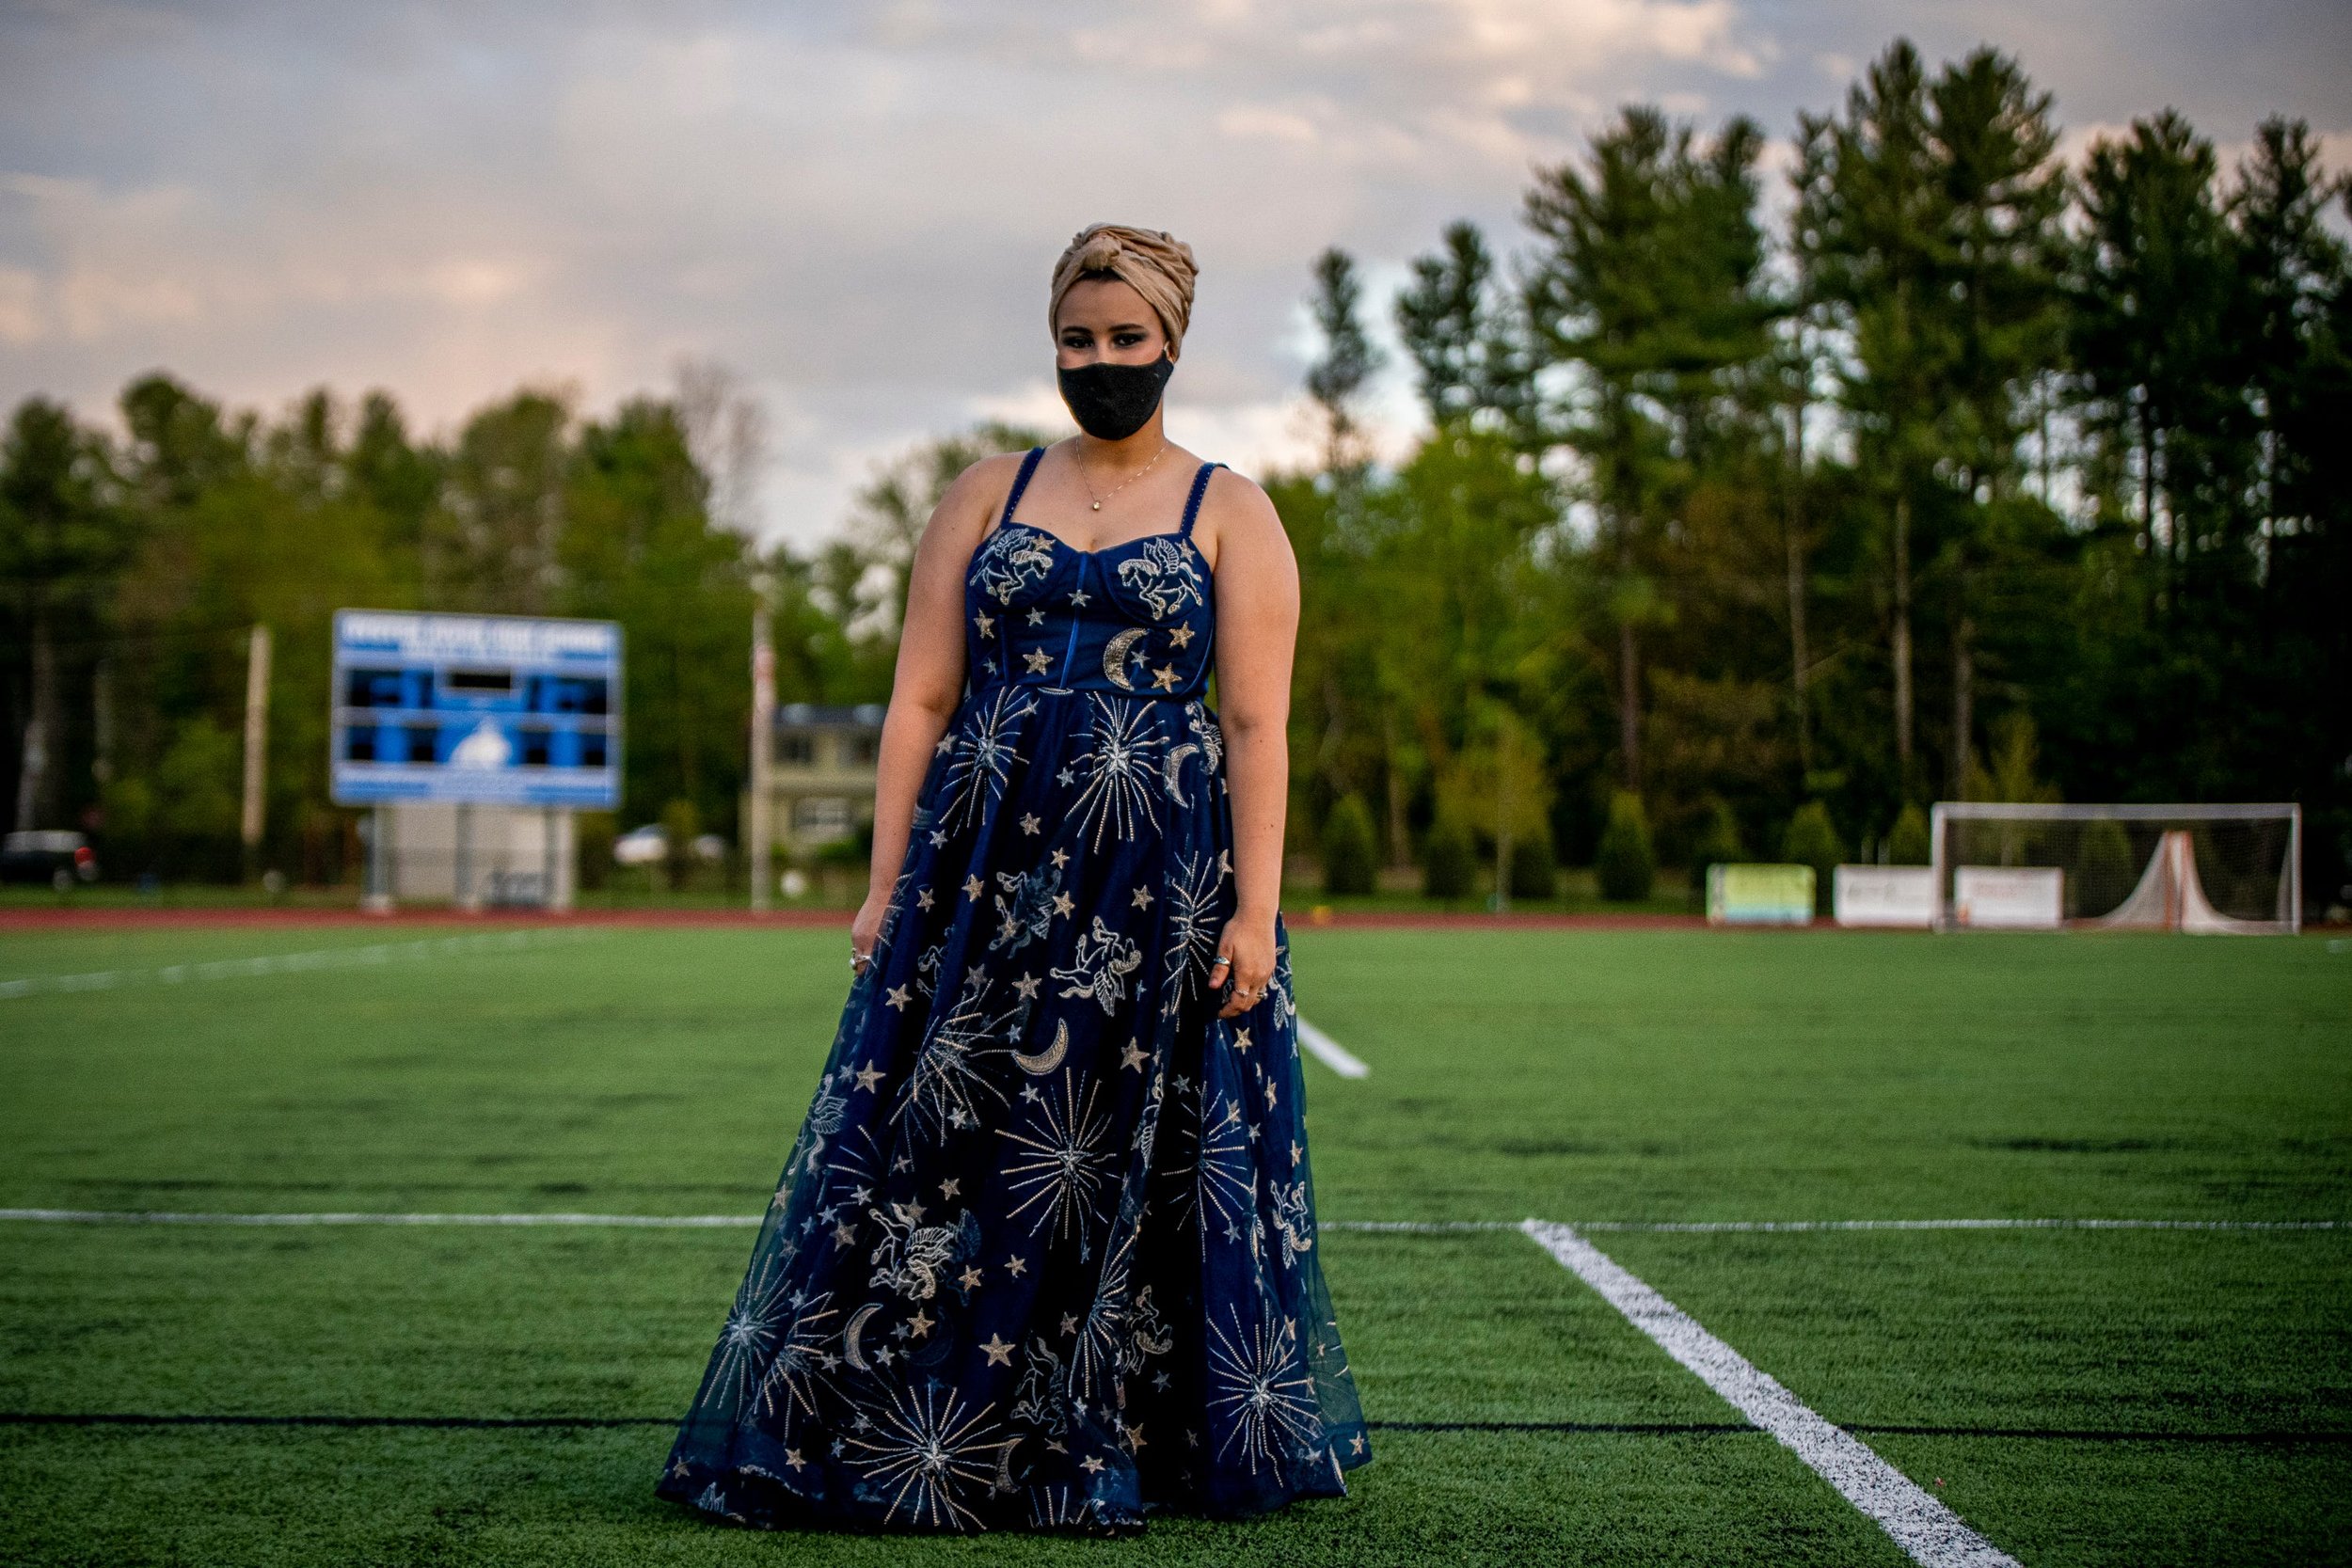  Oyster River High School student Anna Blezard, 18, poses during senior prom in Durham, New Hampshire on May 12, 2021. Oyster River High School juniors and seniors gathered outside, on the school's turf field, to celebrate what was  called a Mask-era